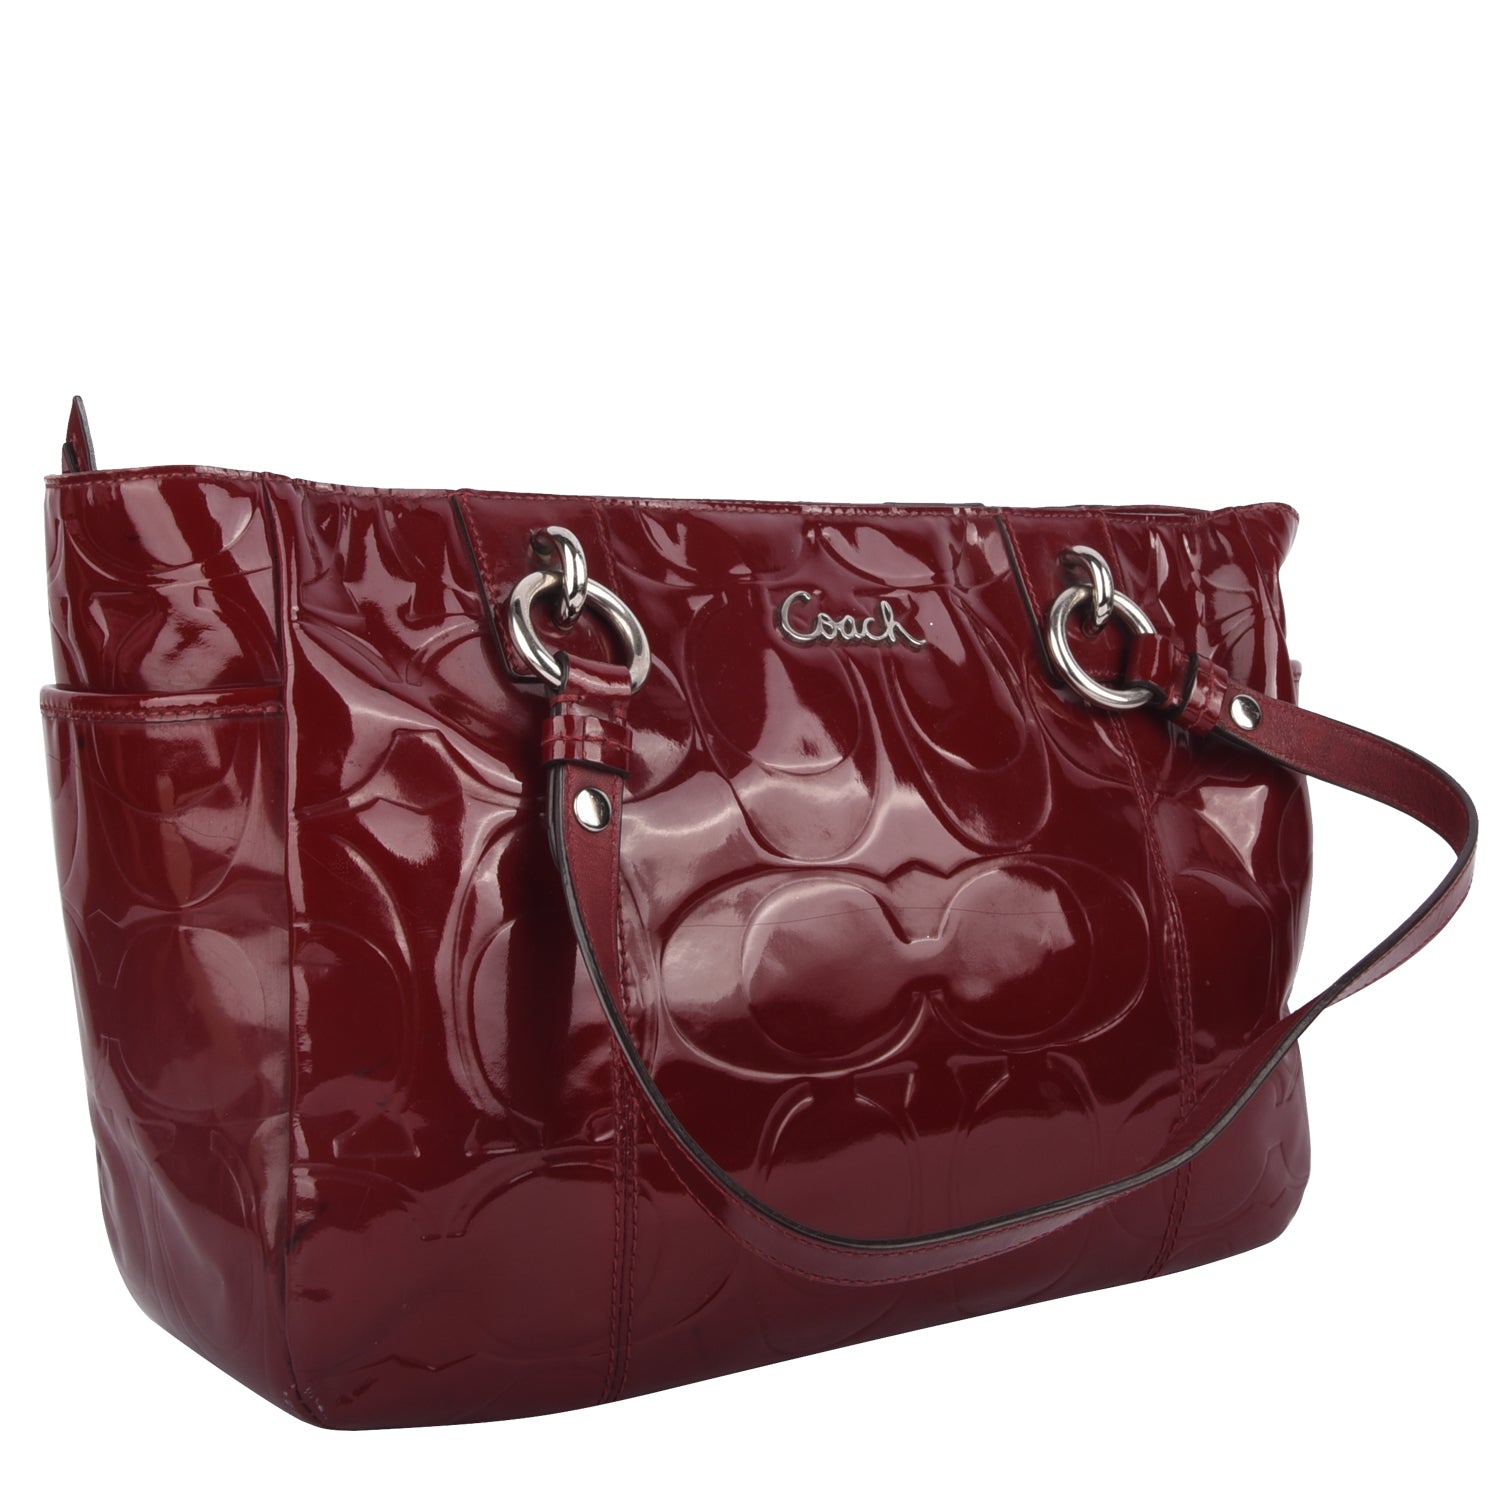 Coach Gallery Embossed Red Patent Leather Tote